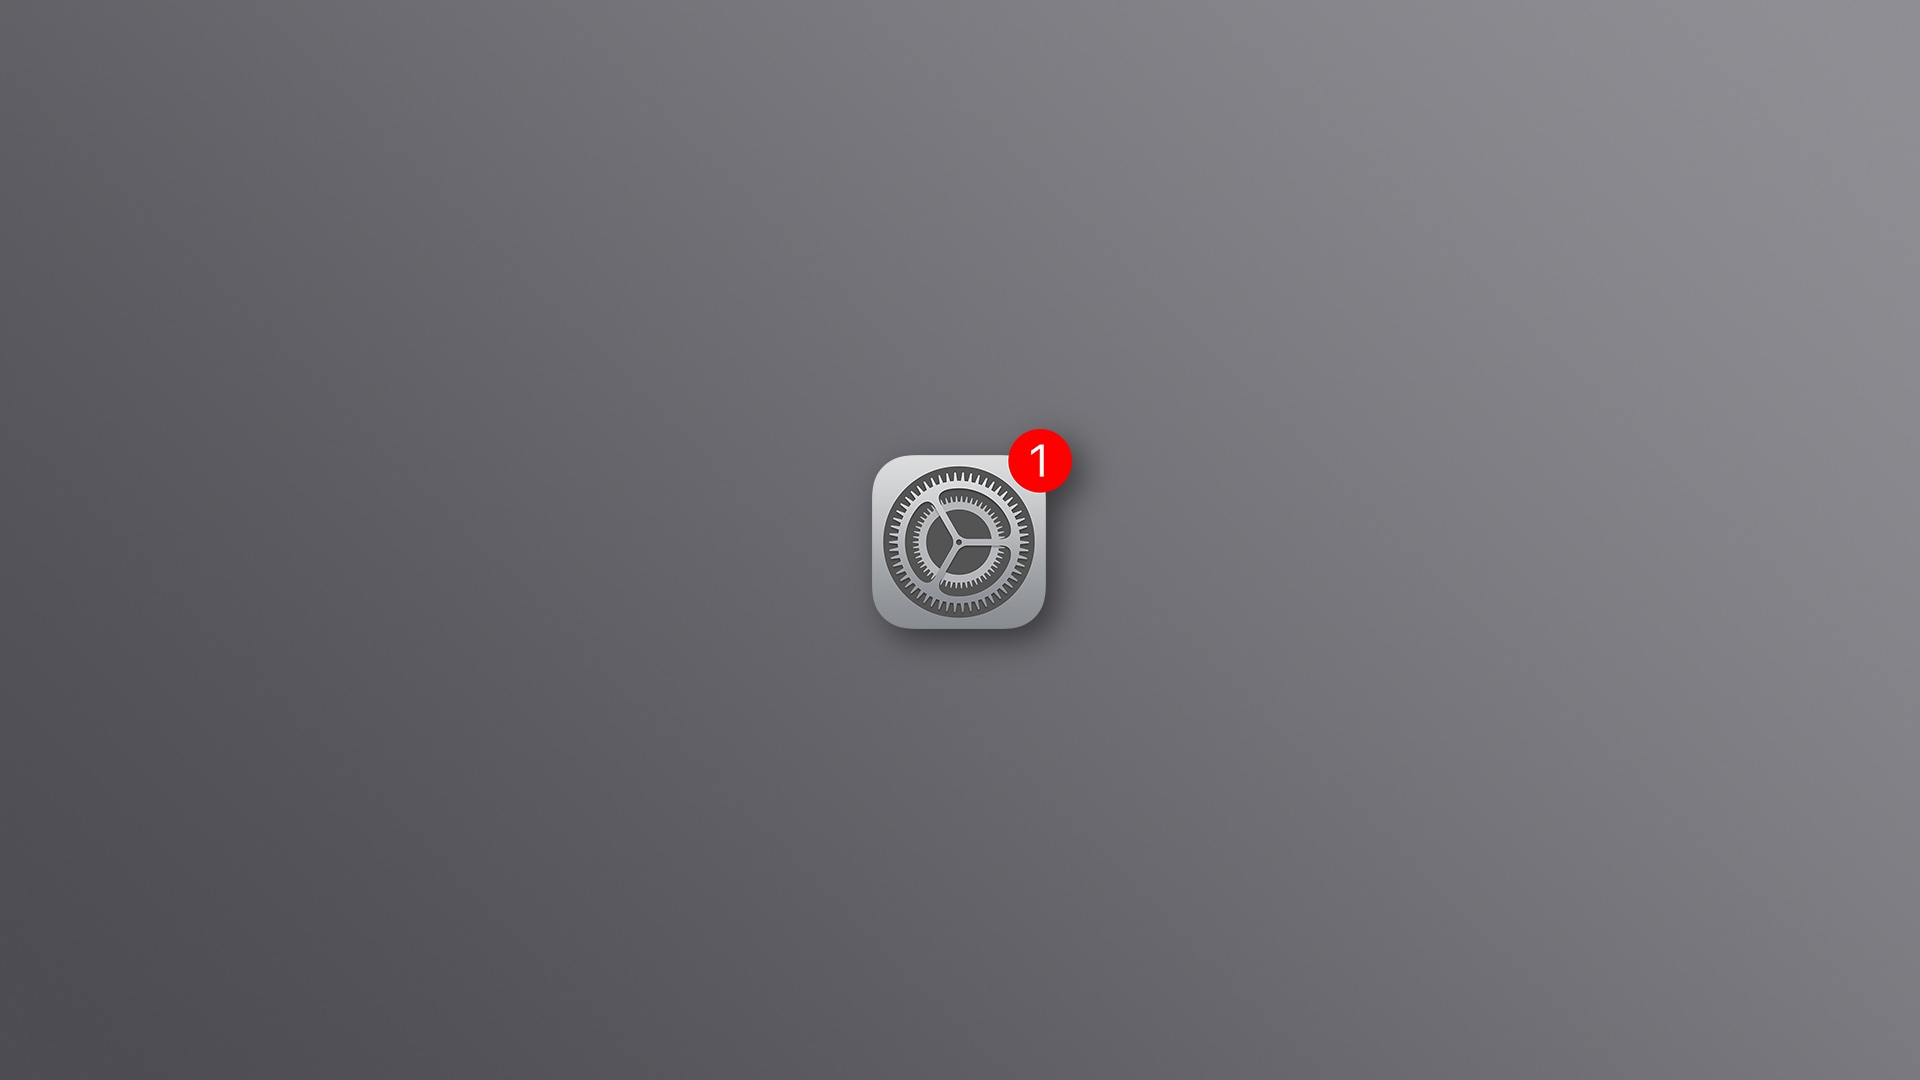 The iPhone's Settings icon with red badge, set against a gray background